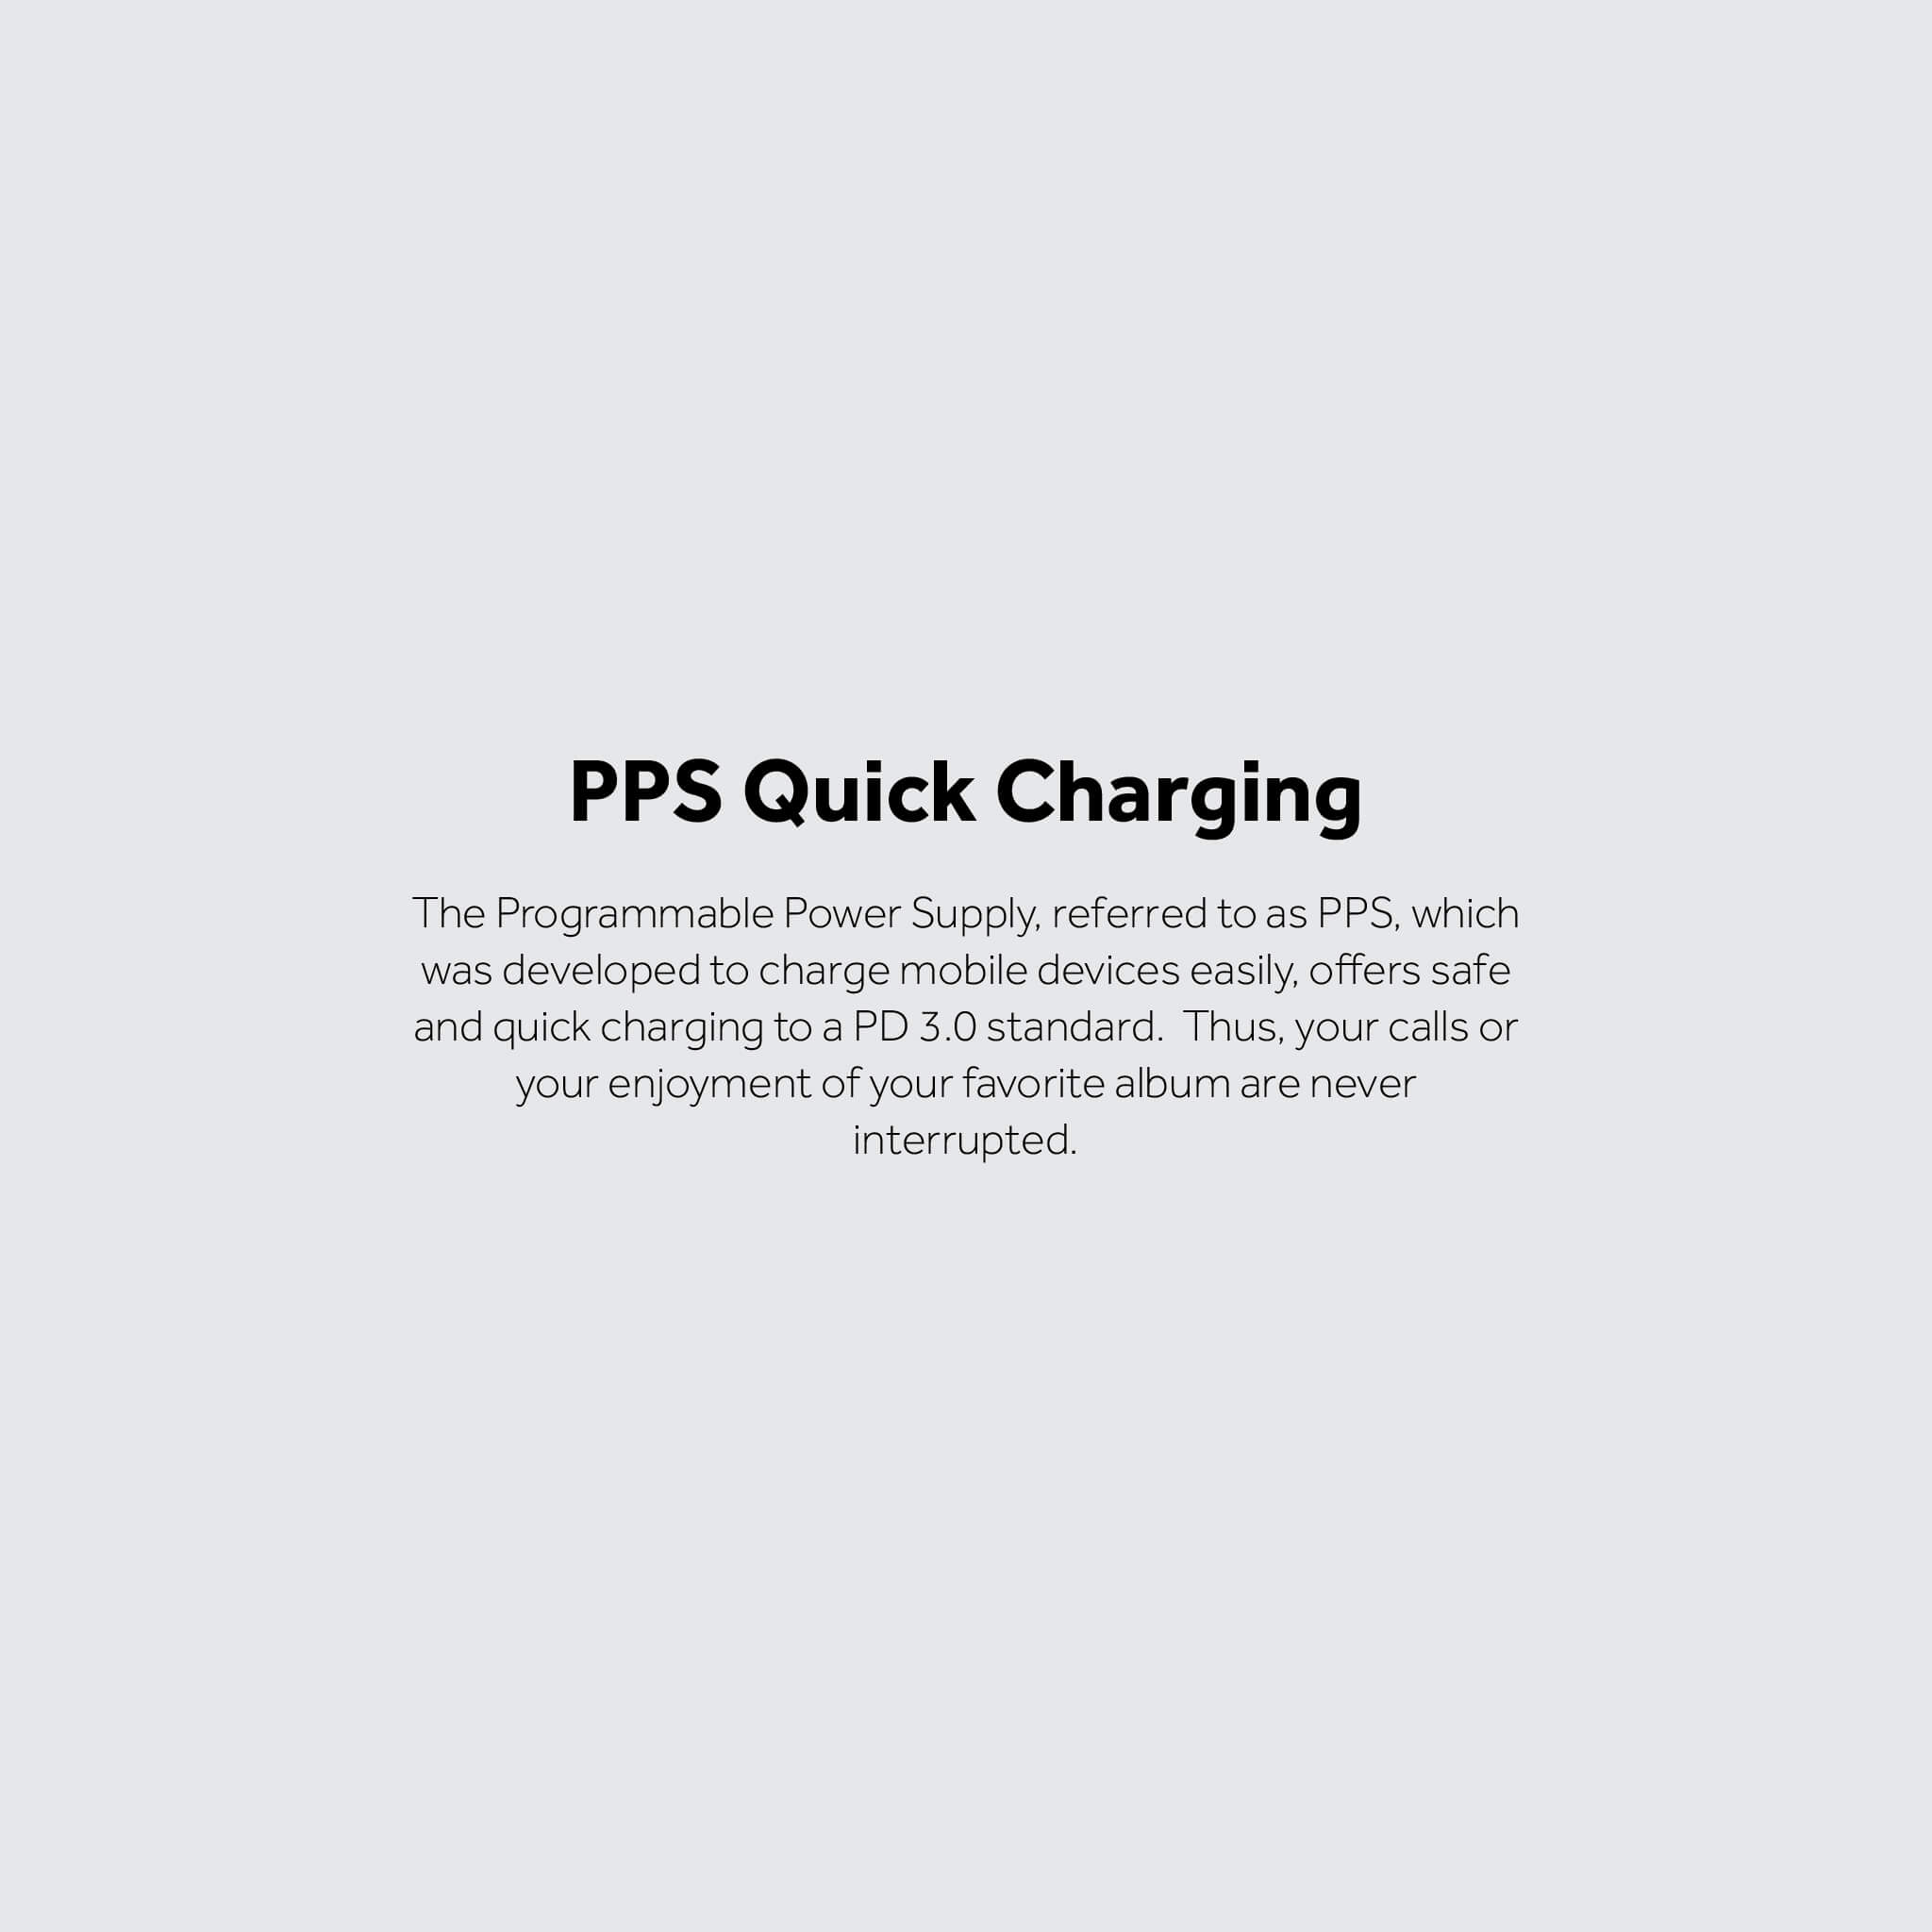 PPS Quick Charging